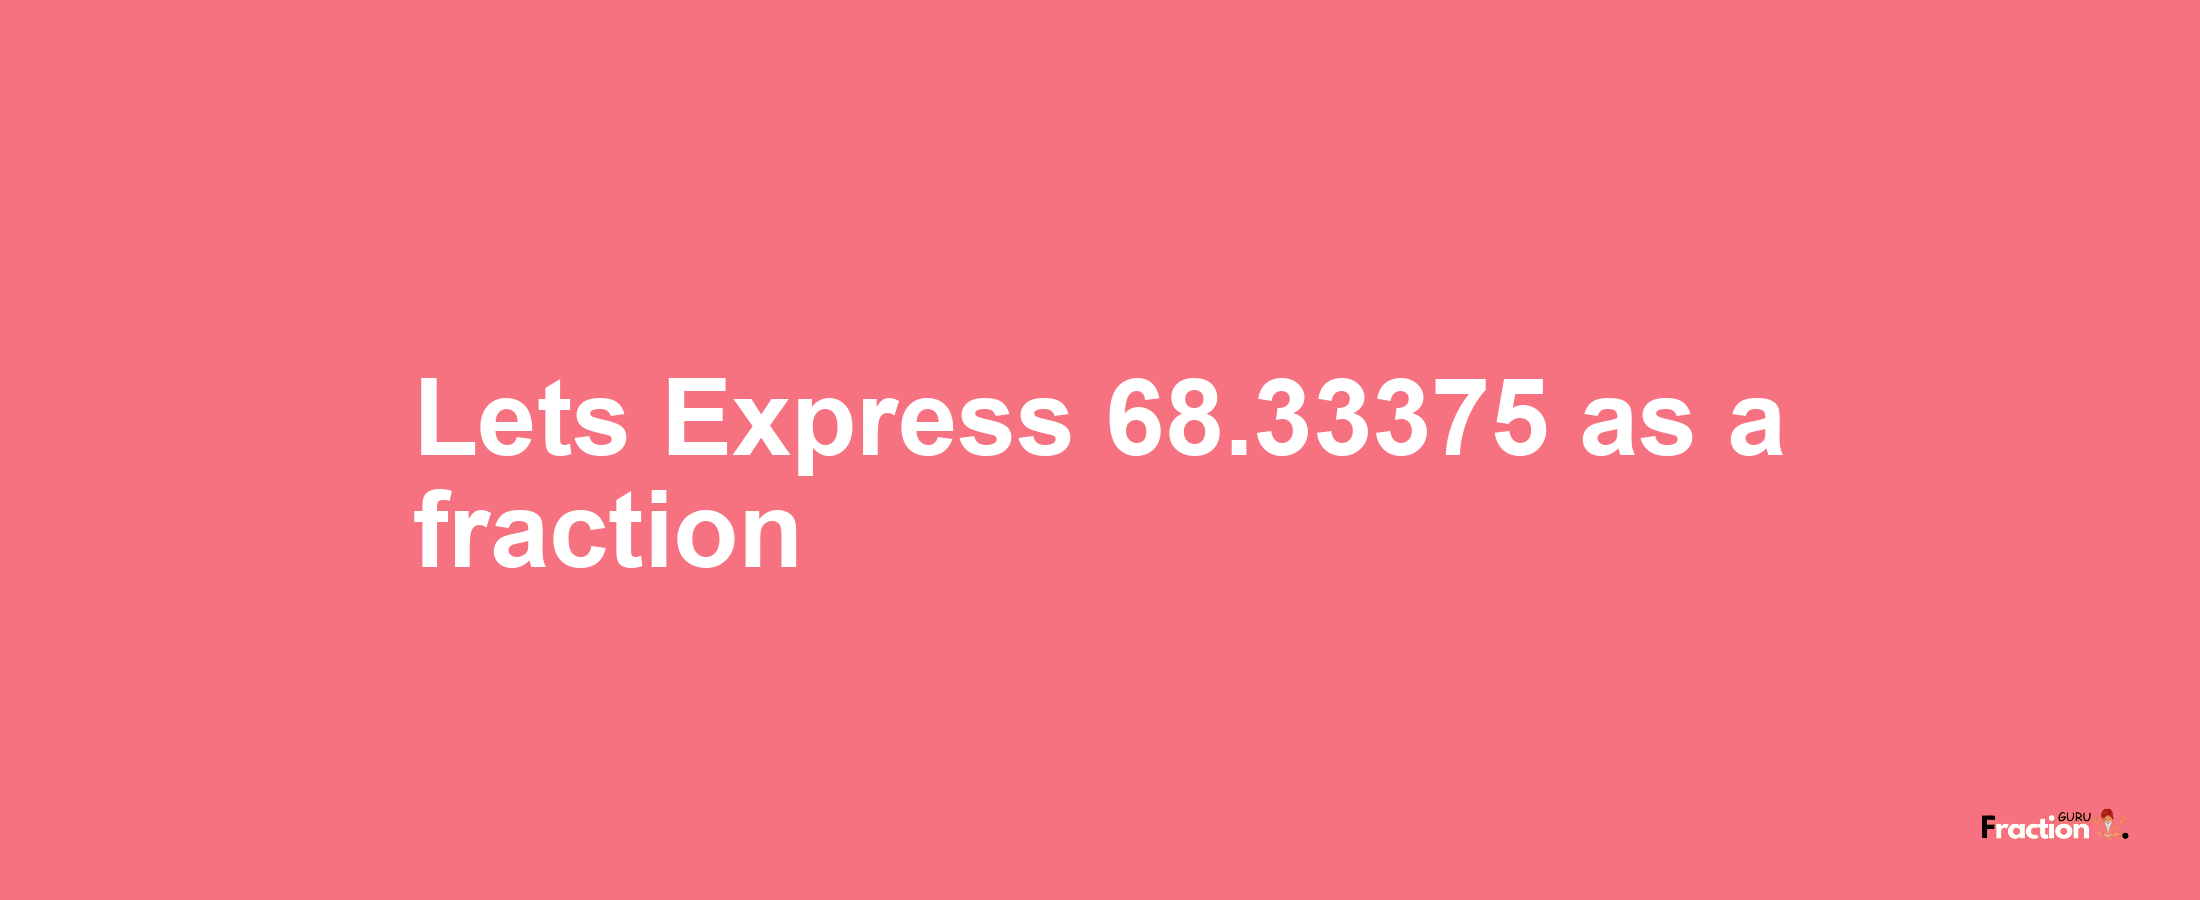 Lets Express 68.33375 as afraction